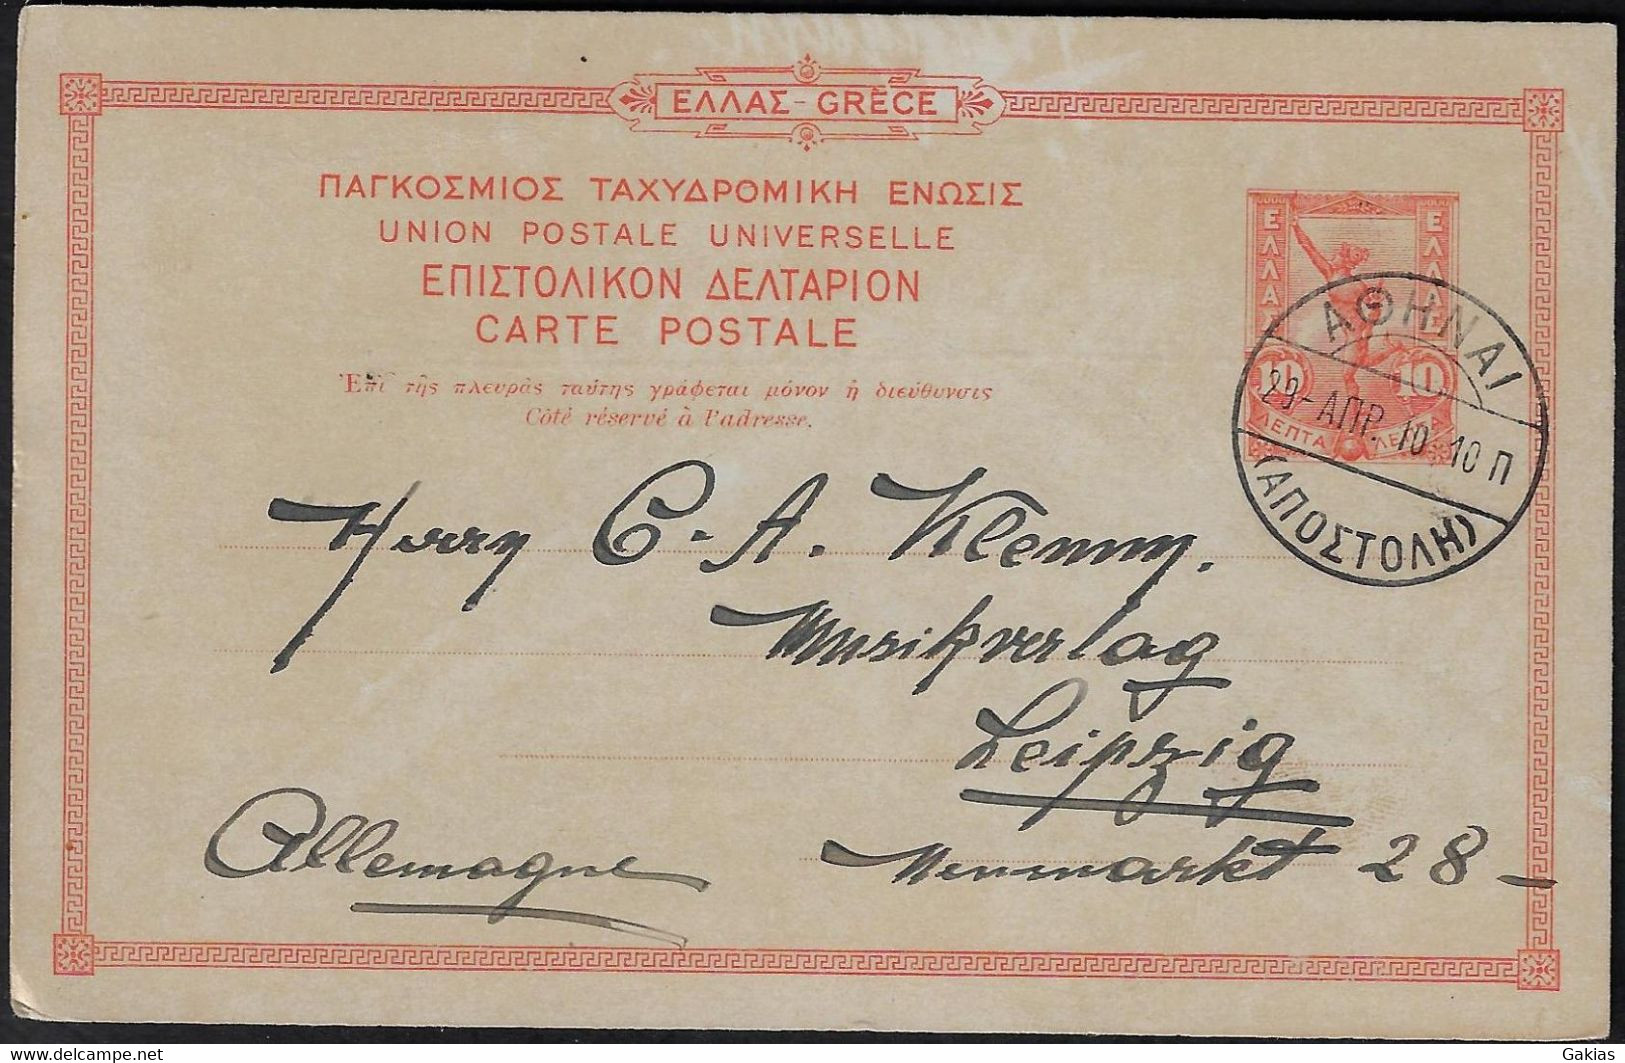 GREECE, 1910 Nice Postal Card Mailed ATHENS 29 APRIL 1910 To GERMANY - Covers & Documents